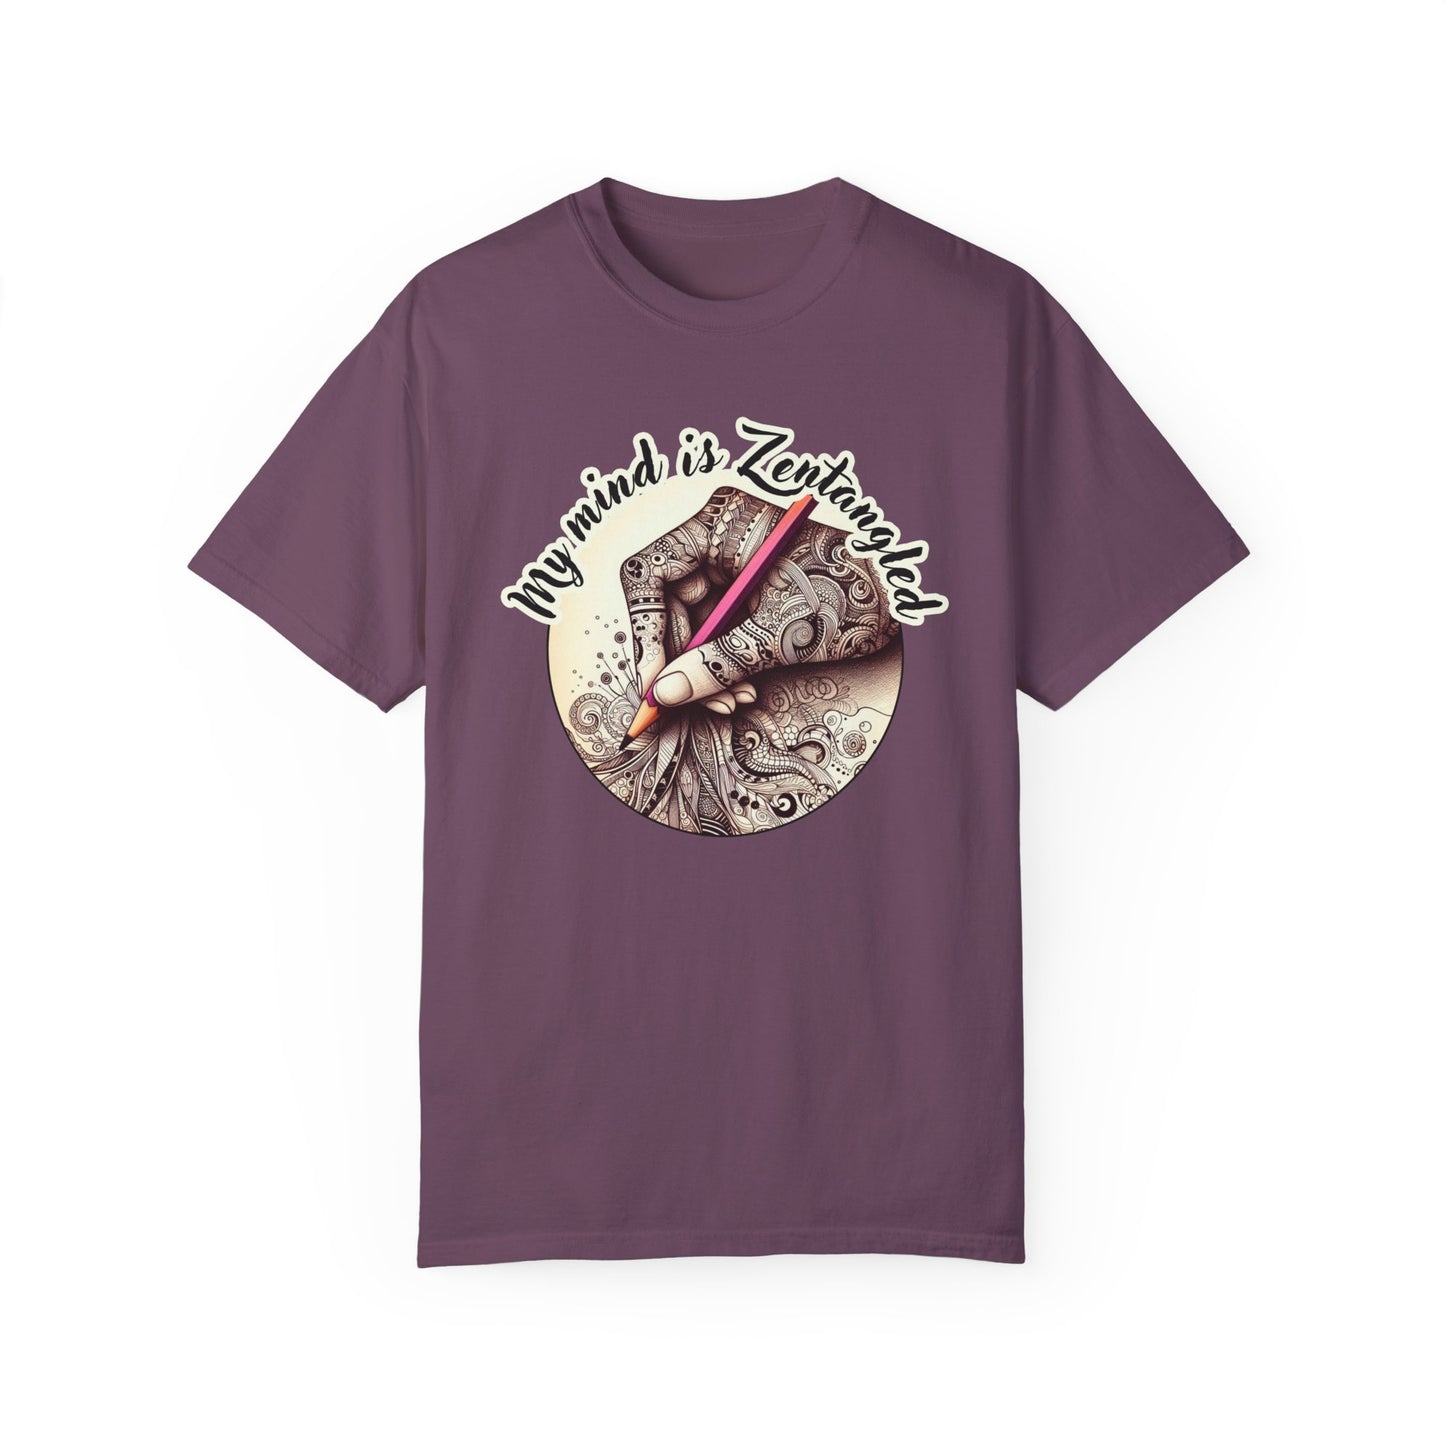 My mind is zentangled T-Shirt